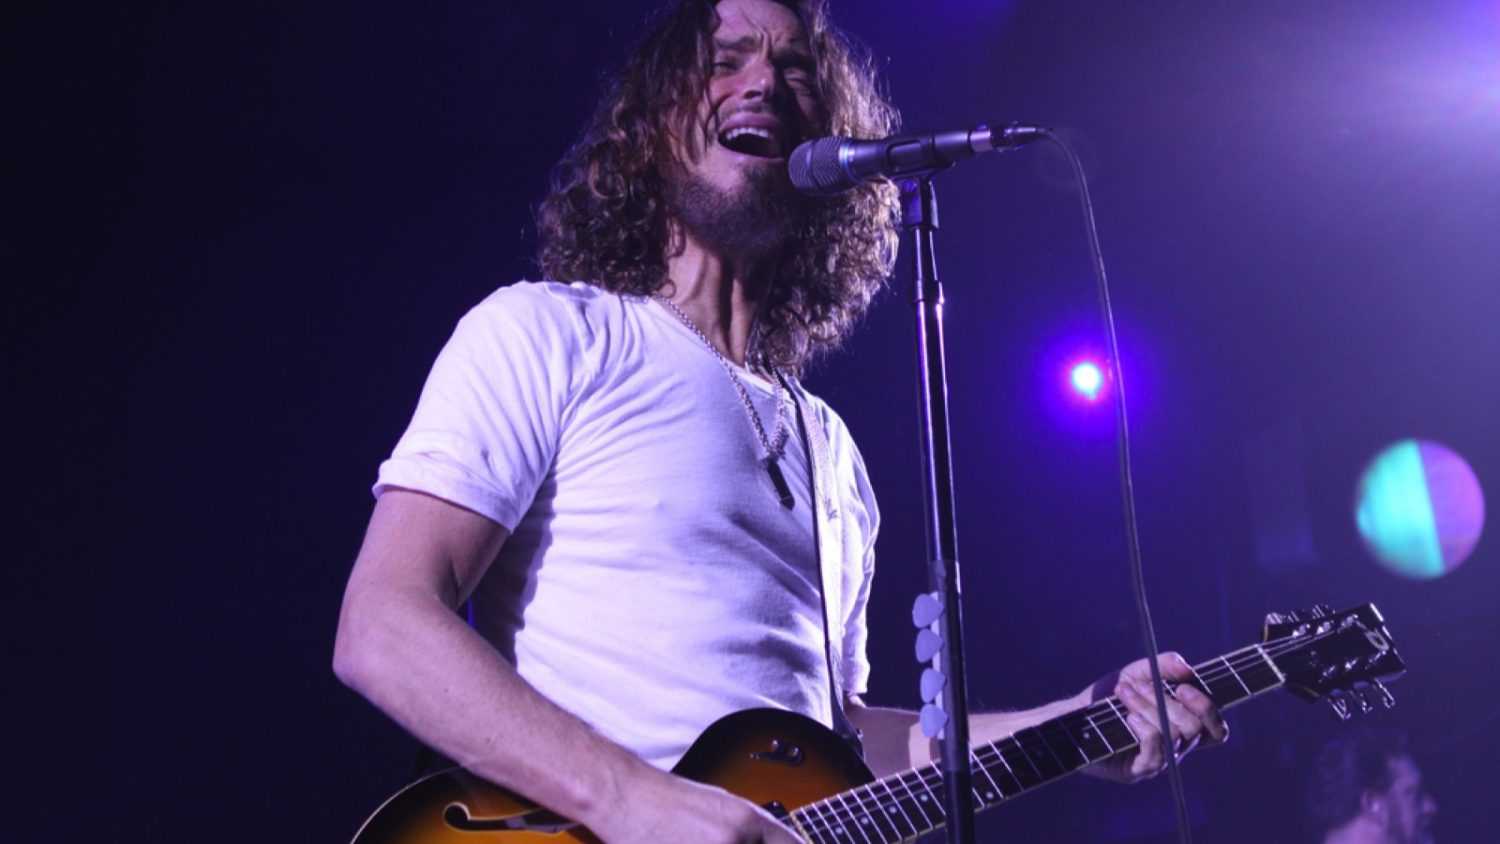 TORONTO - JANUARY 25: Chris Cornell and Soundgarden Perform at the Sound Academy on January 25, 2013 in Toronto.